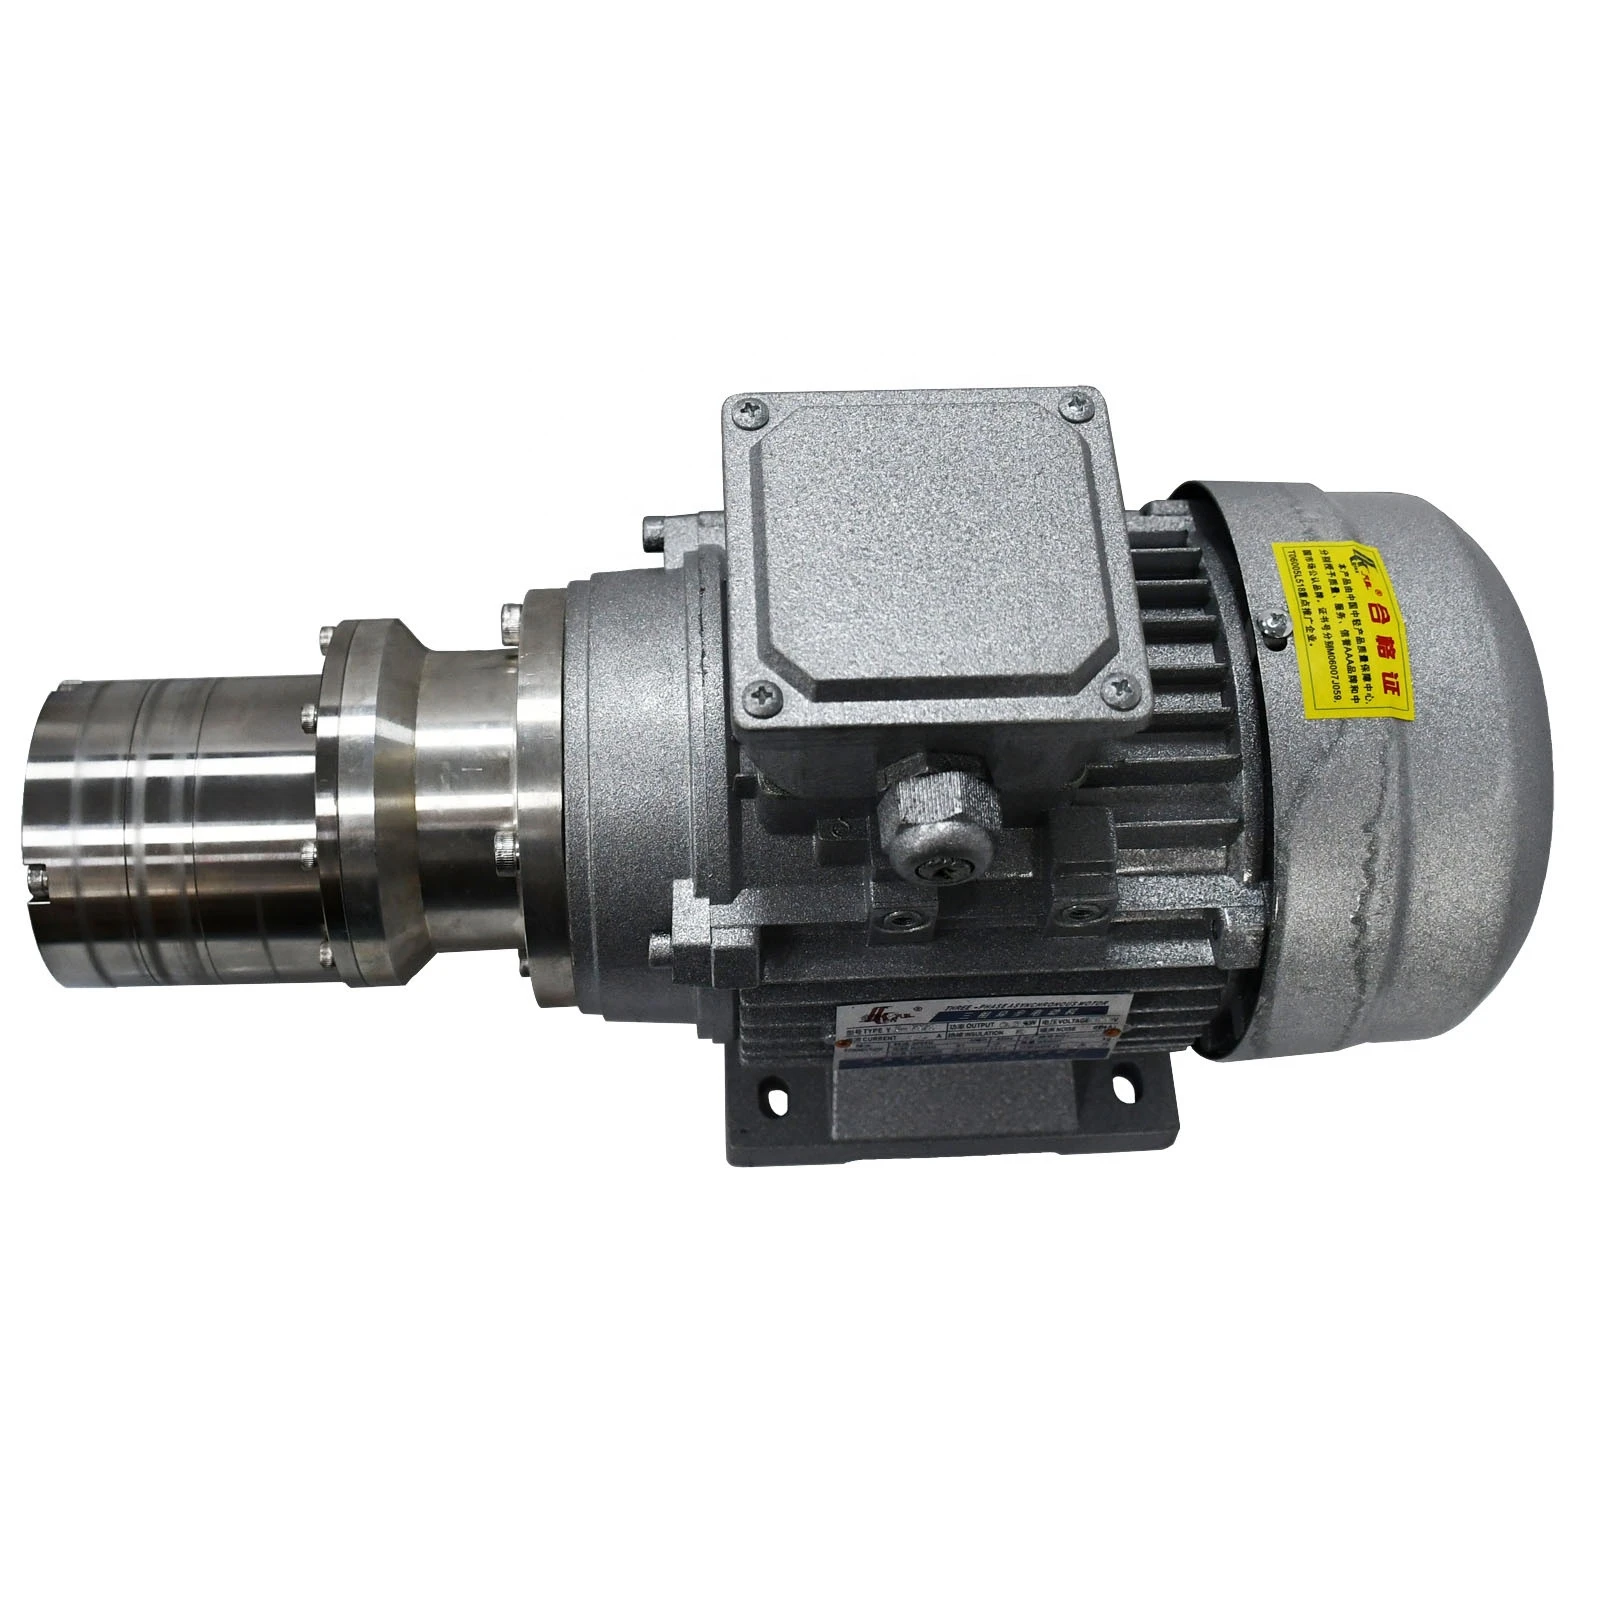 stainless steel Magnetically coupled AC asynchronous motor micro gear pump M6.00S88Y0.55KW2P